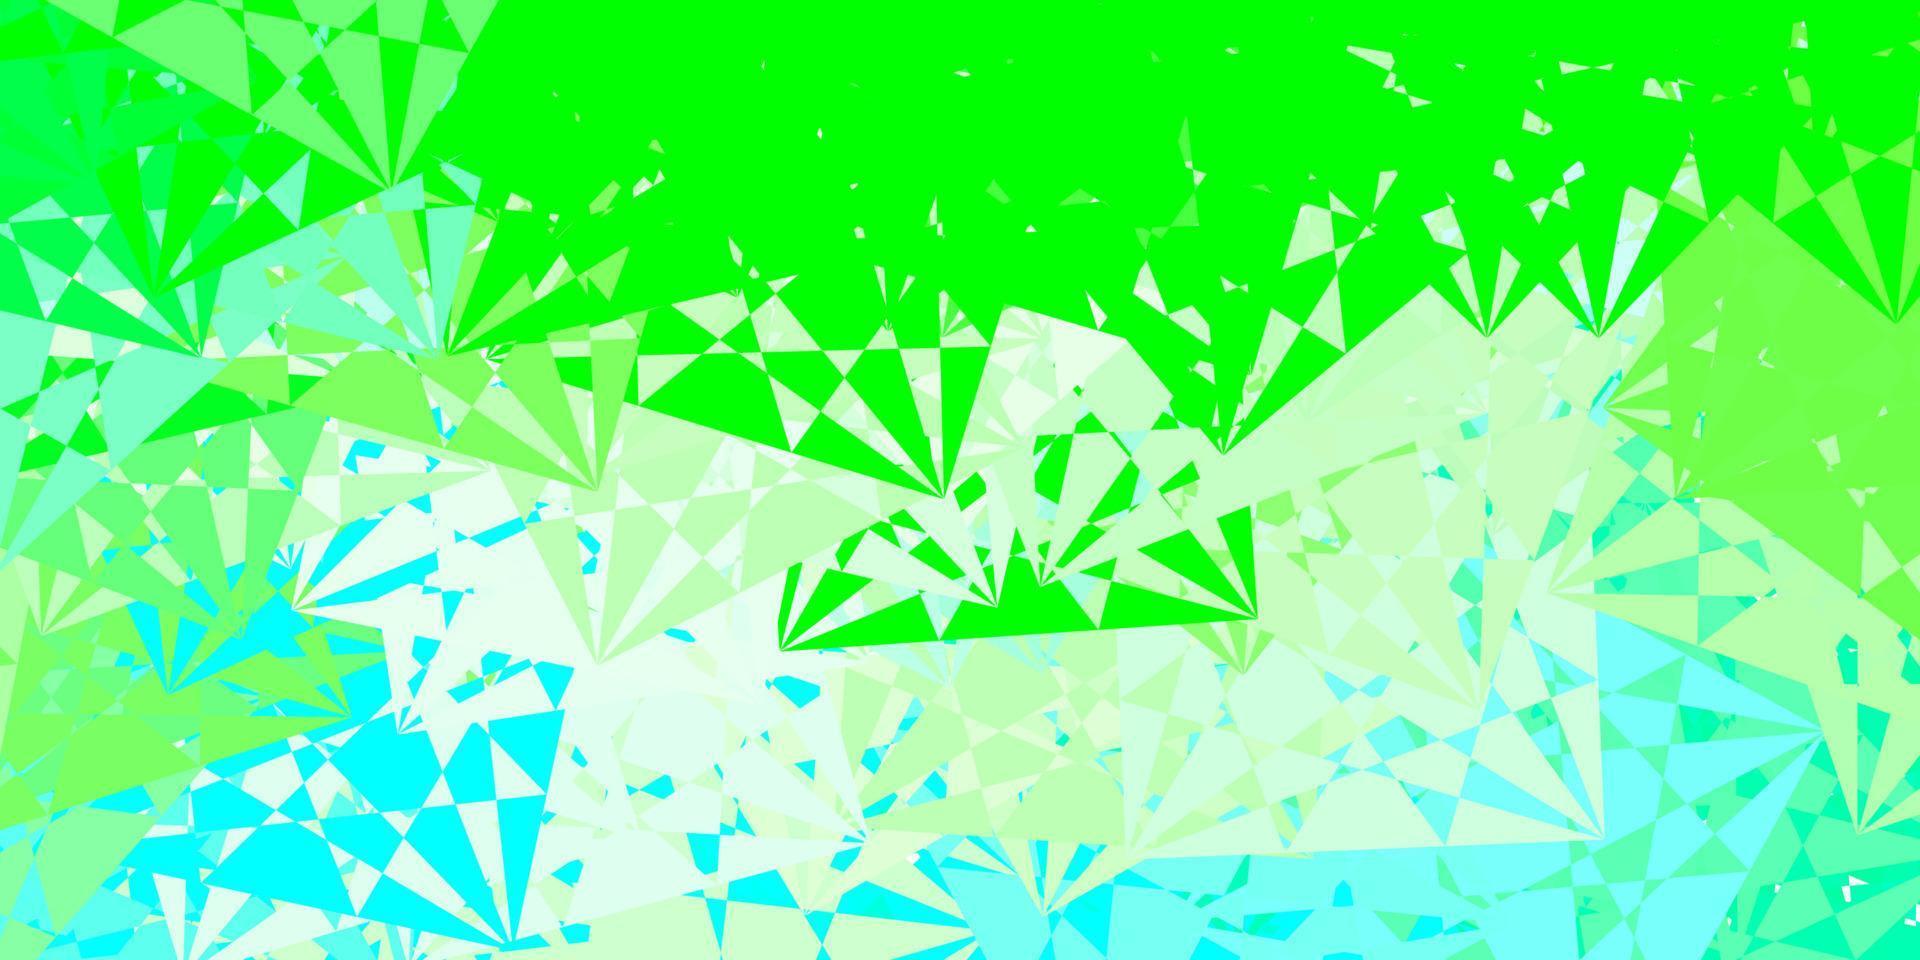 Light Green vector texture with memphis shapes.